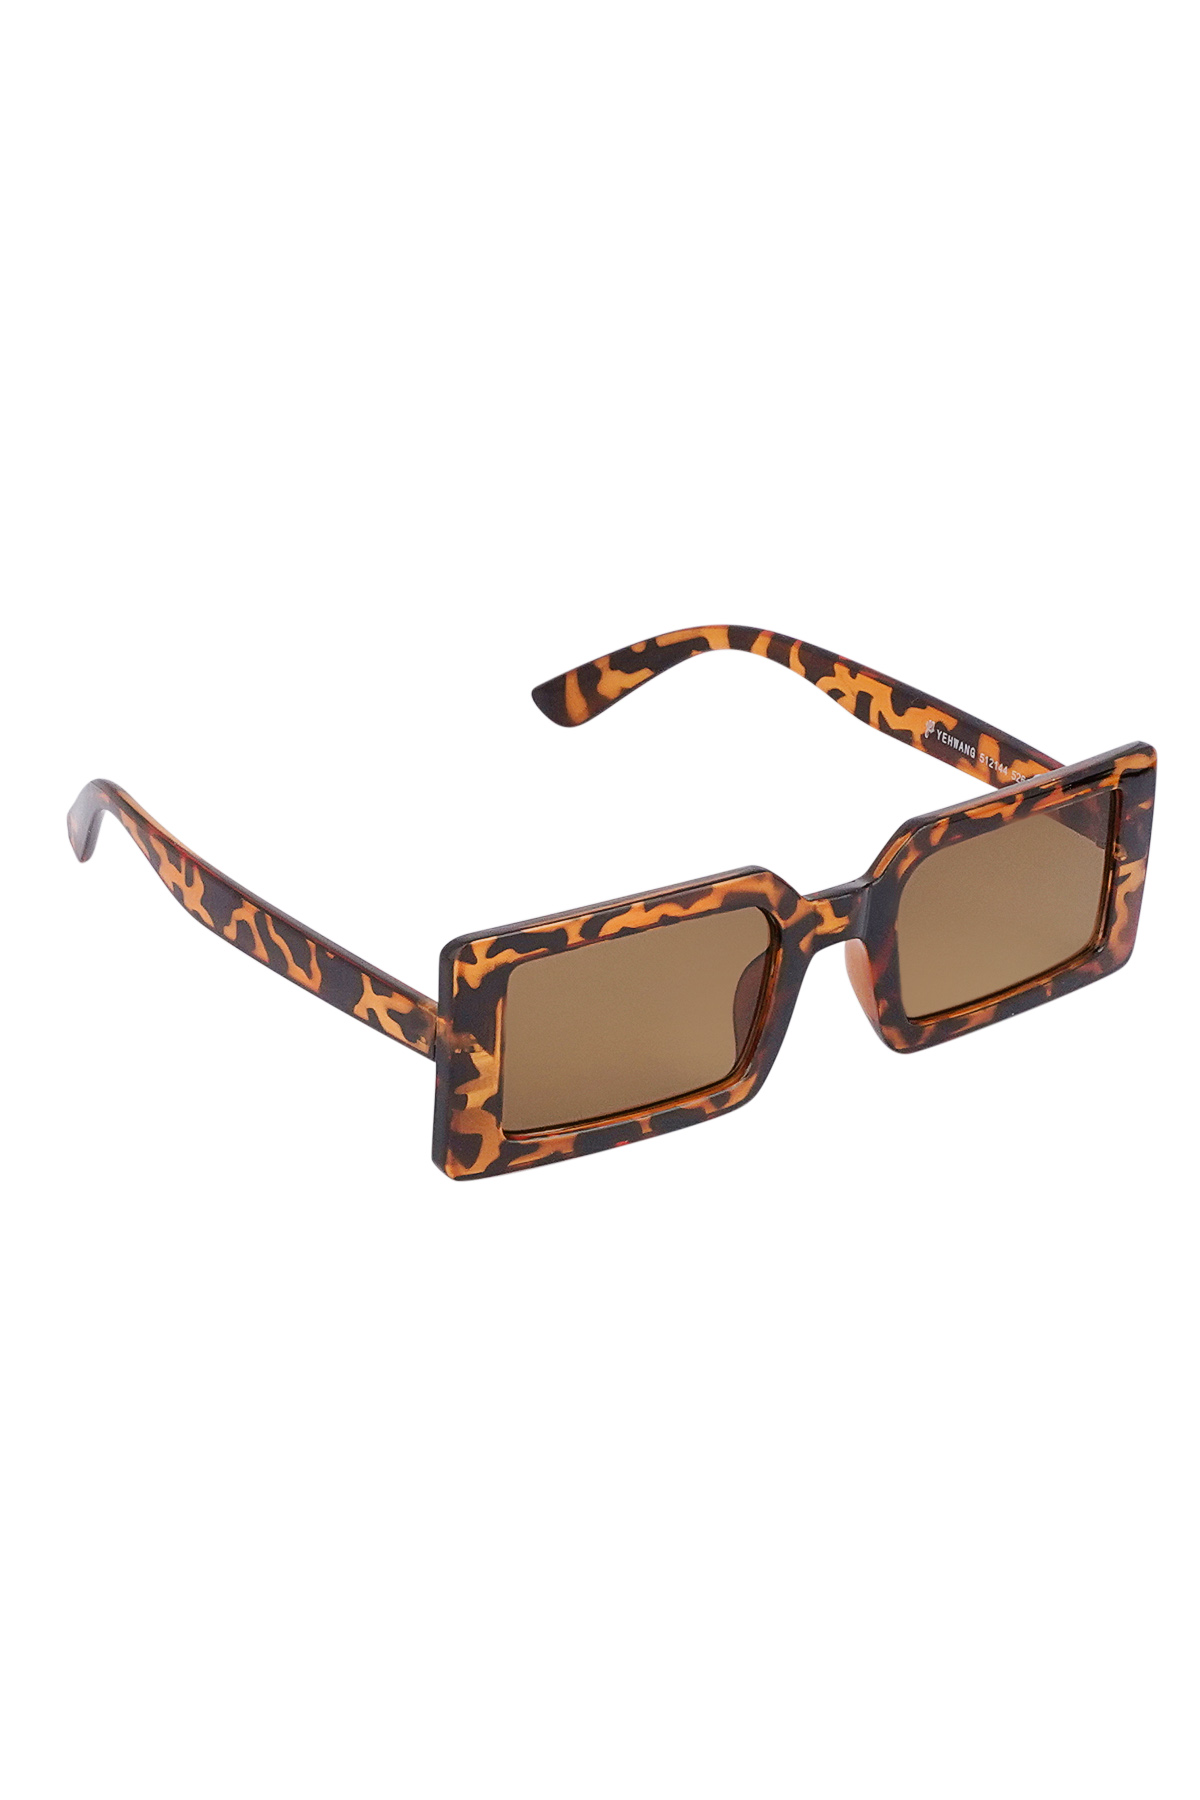 Shimmerglow sunglasses - brown